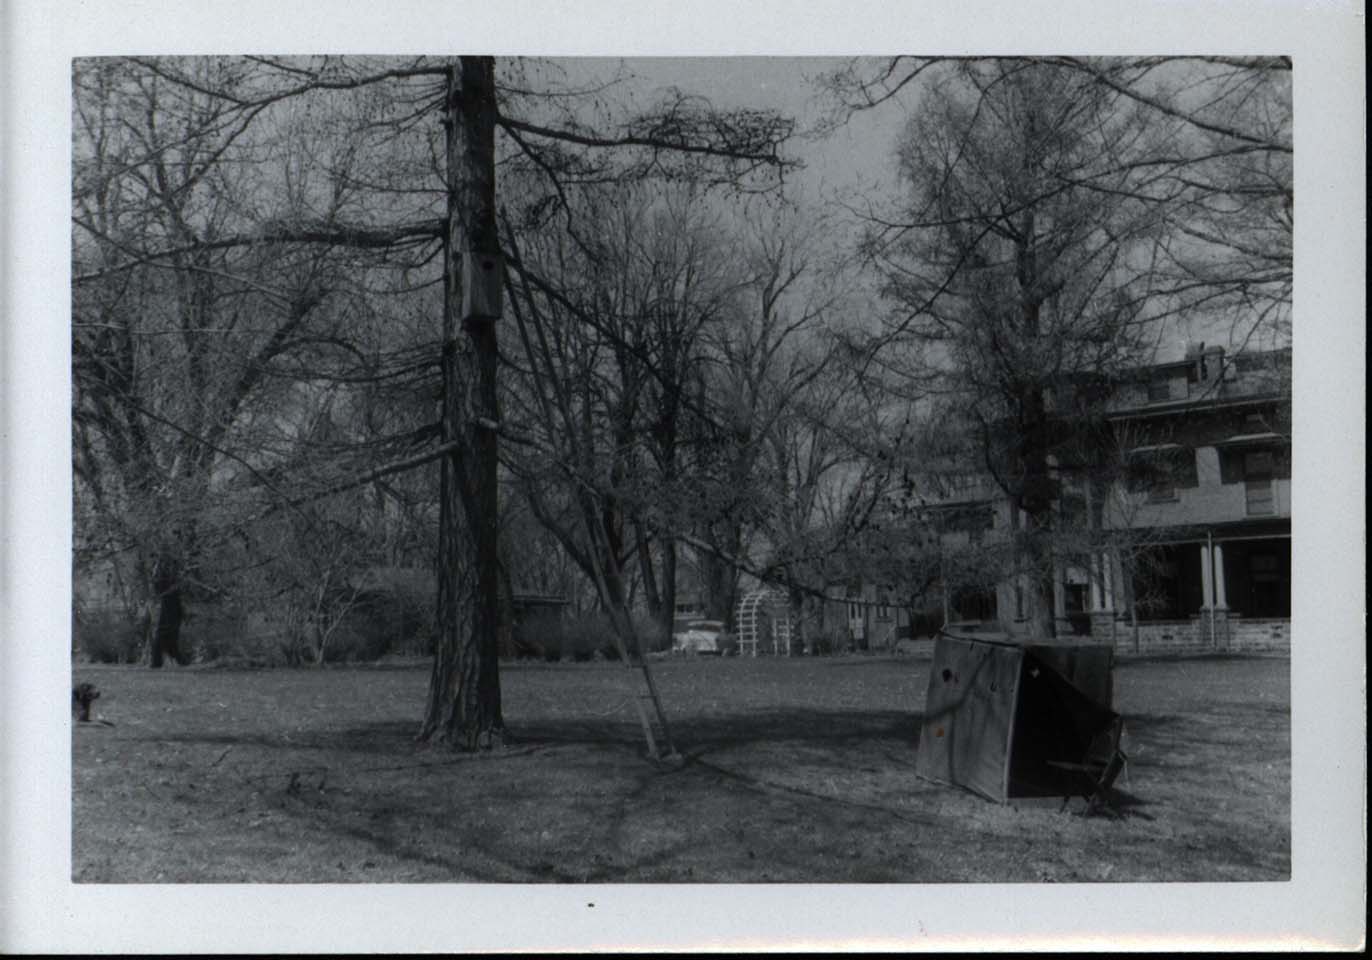 Photograph of a Wood Duck house and an observation blind in front of Frederic Leopold's house